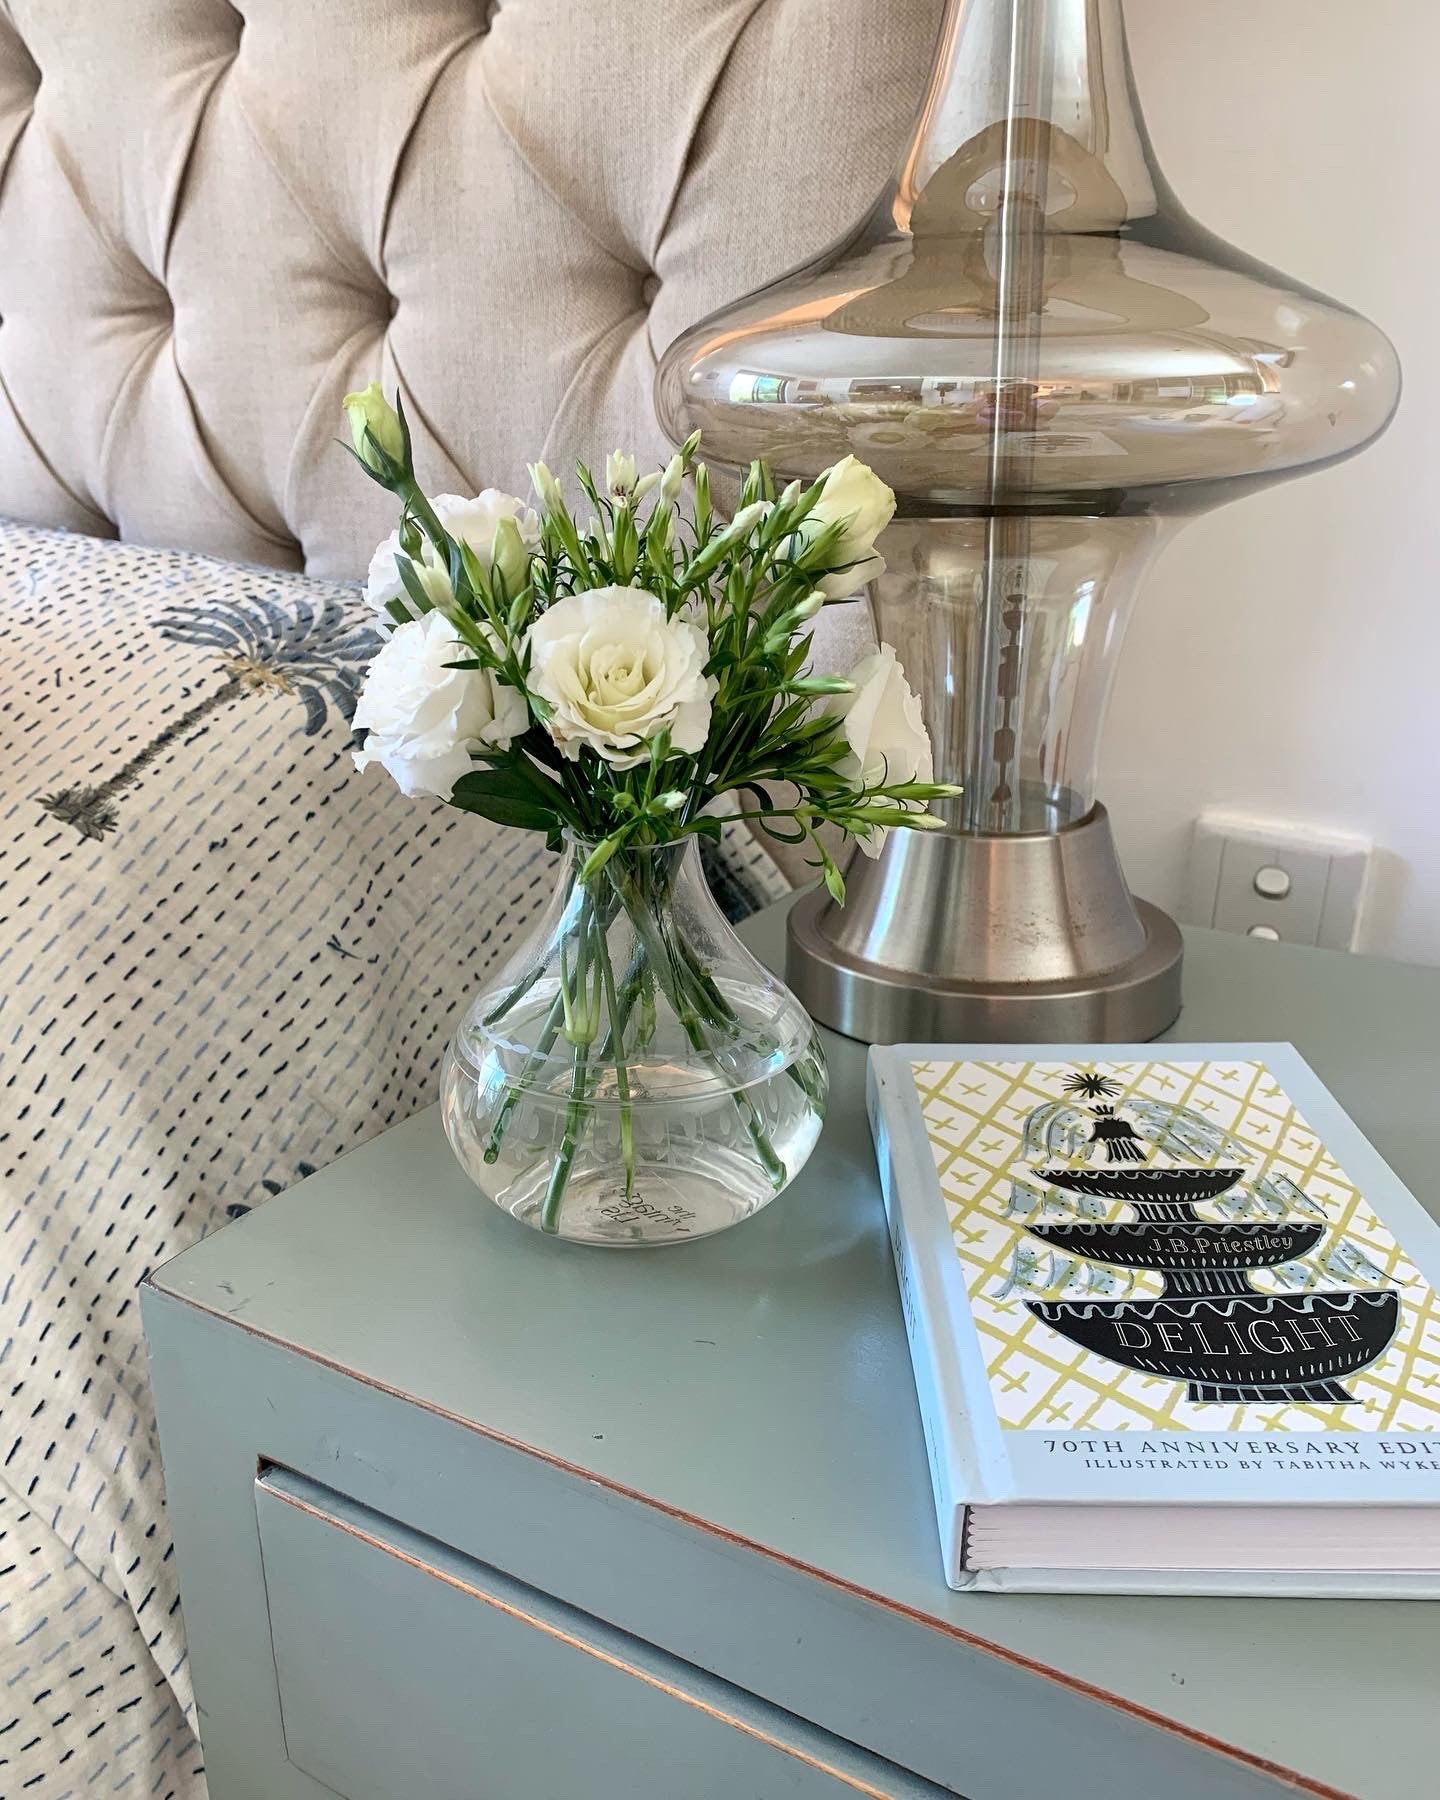 A crystal vase filled with flowers sitting on a bedside table next to a book and a lamp.